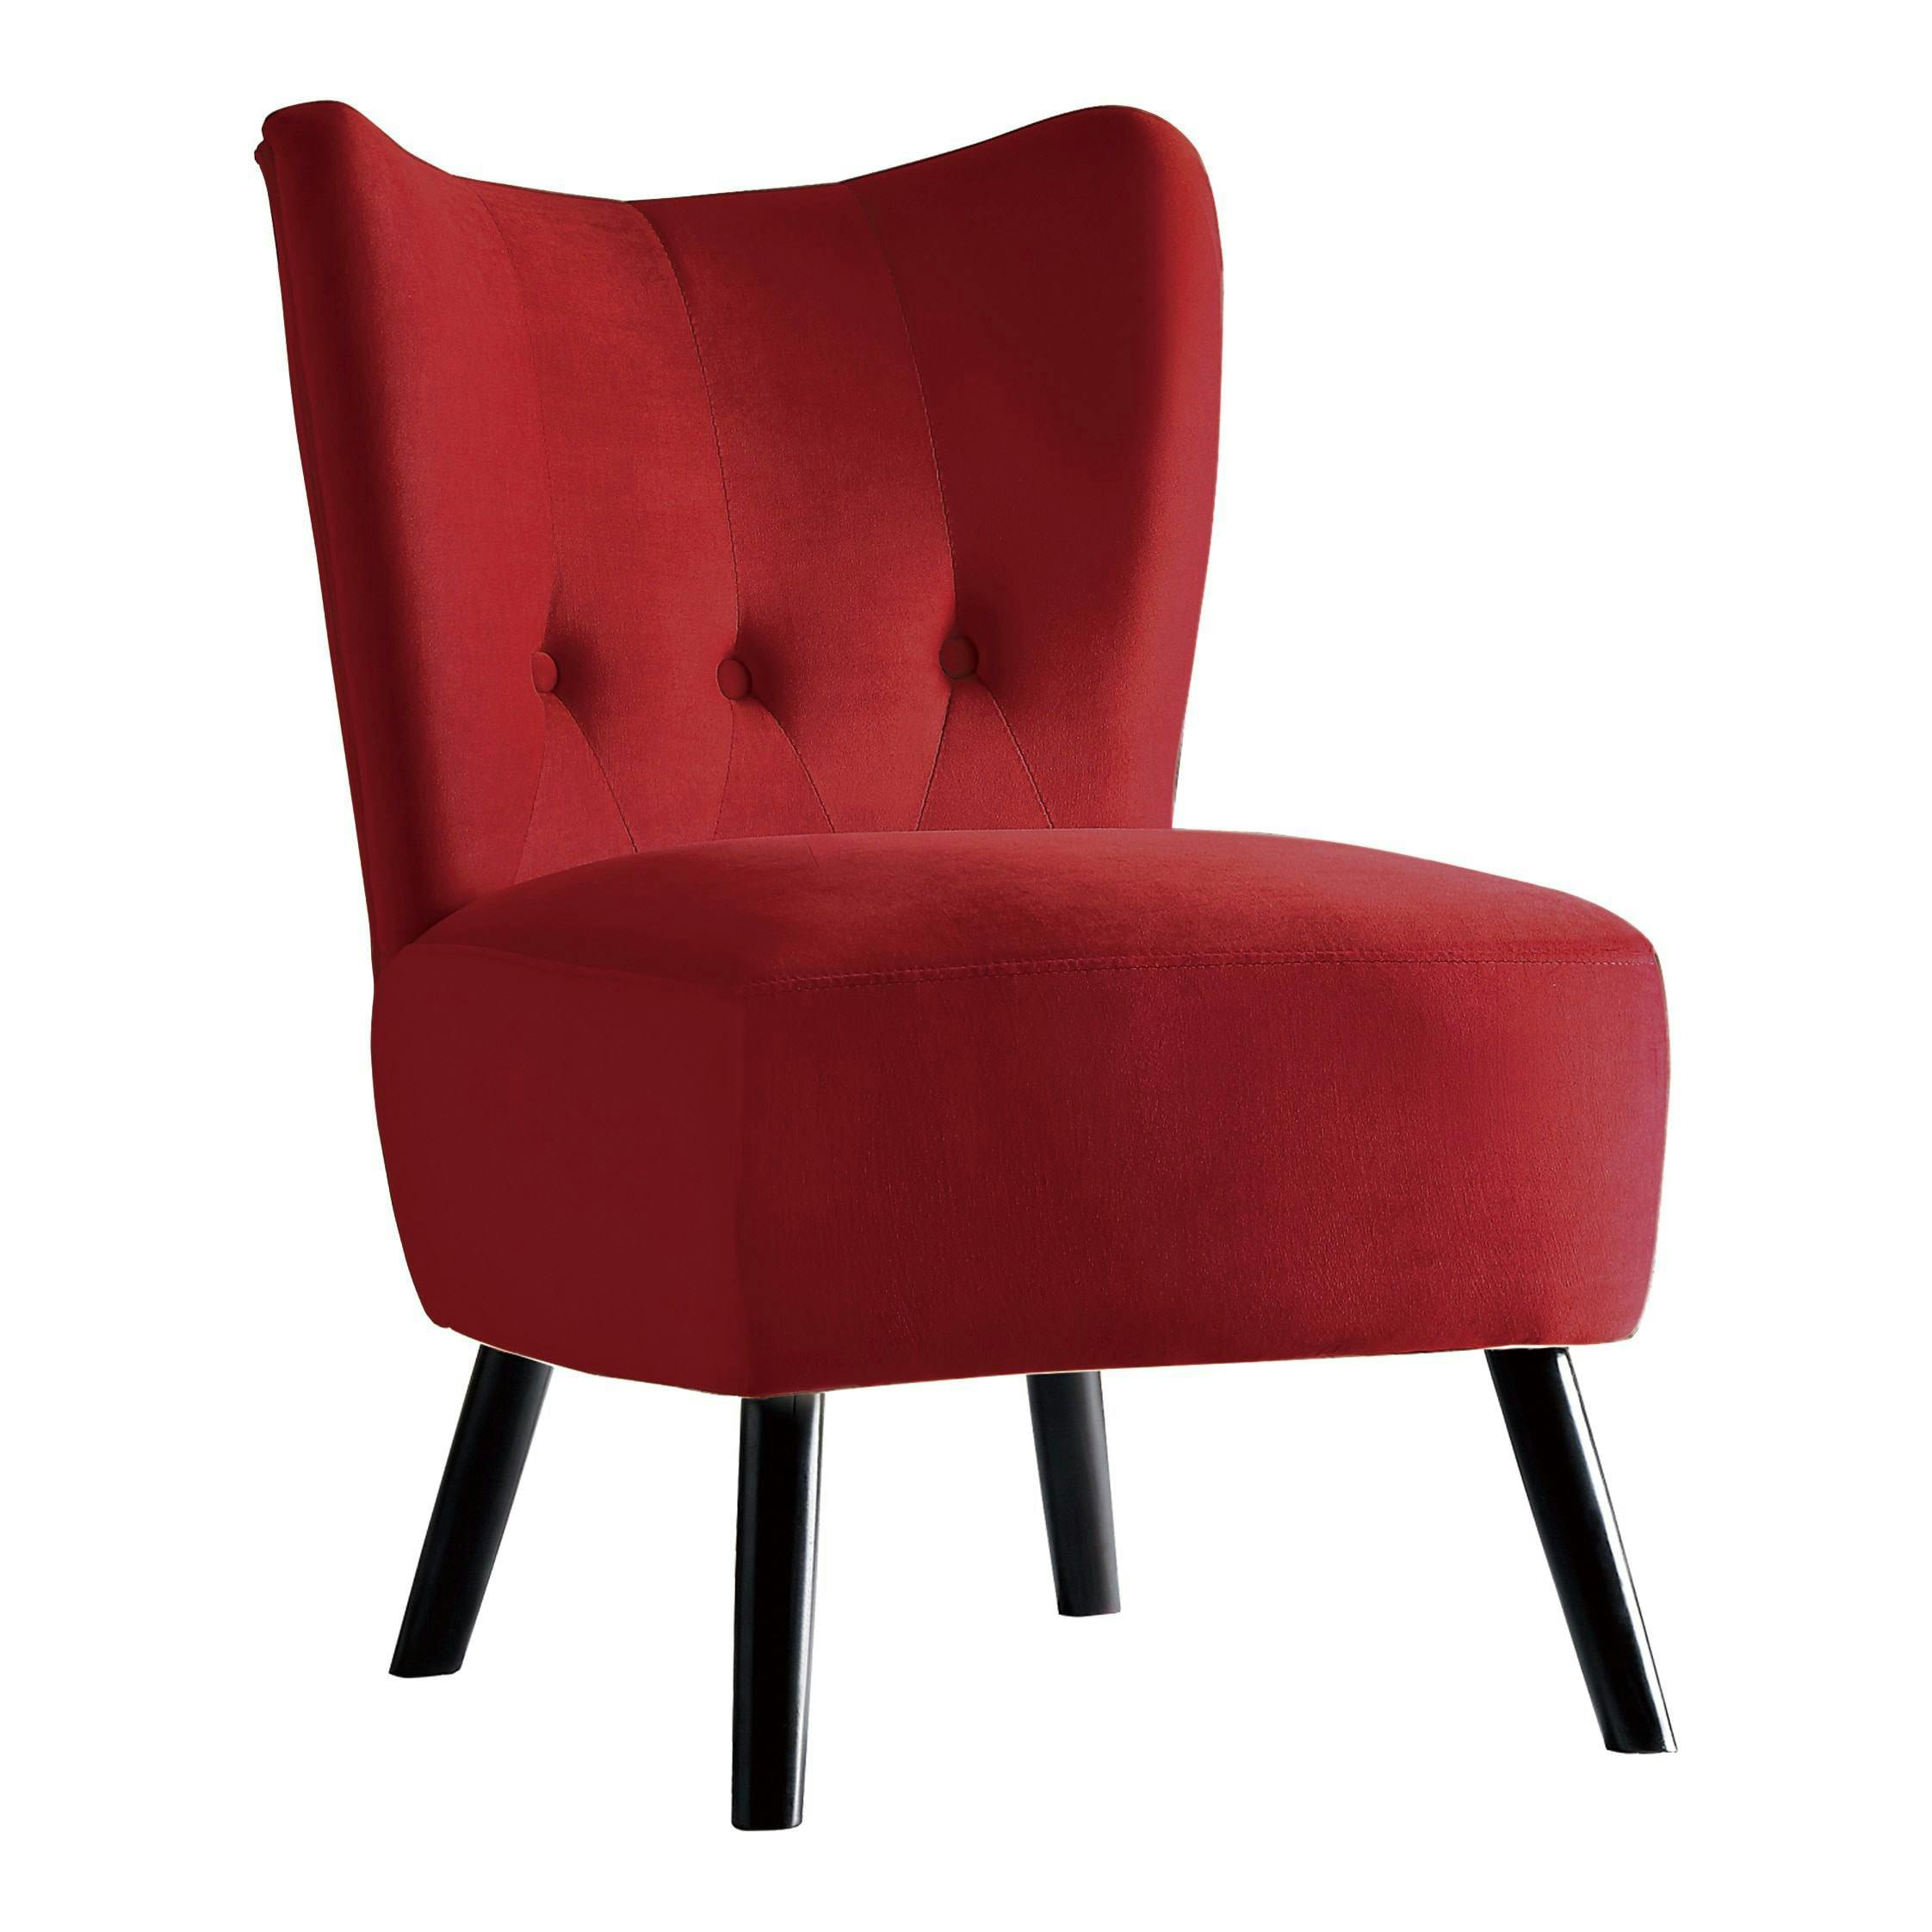 Velvet Accent Armless Chair Mid Century Modern Upholstered Chair Button Tufted Comfy Leisure Chair Reading Chair with Solid Wood Frame for Living Room Bedroom Guest Room, Red